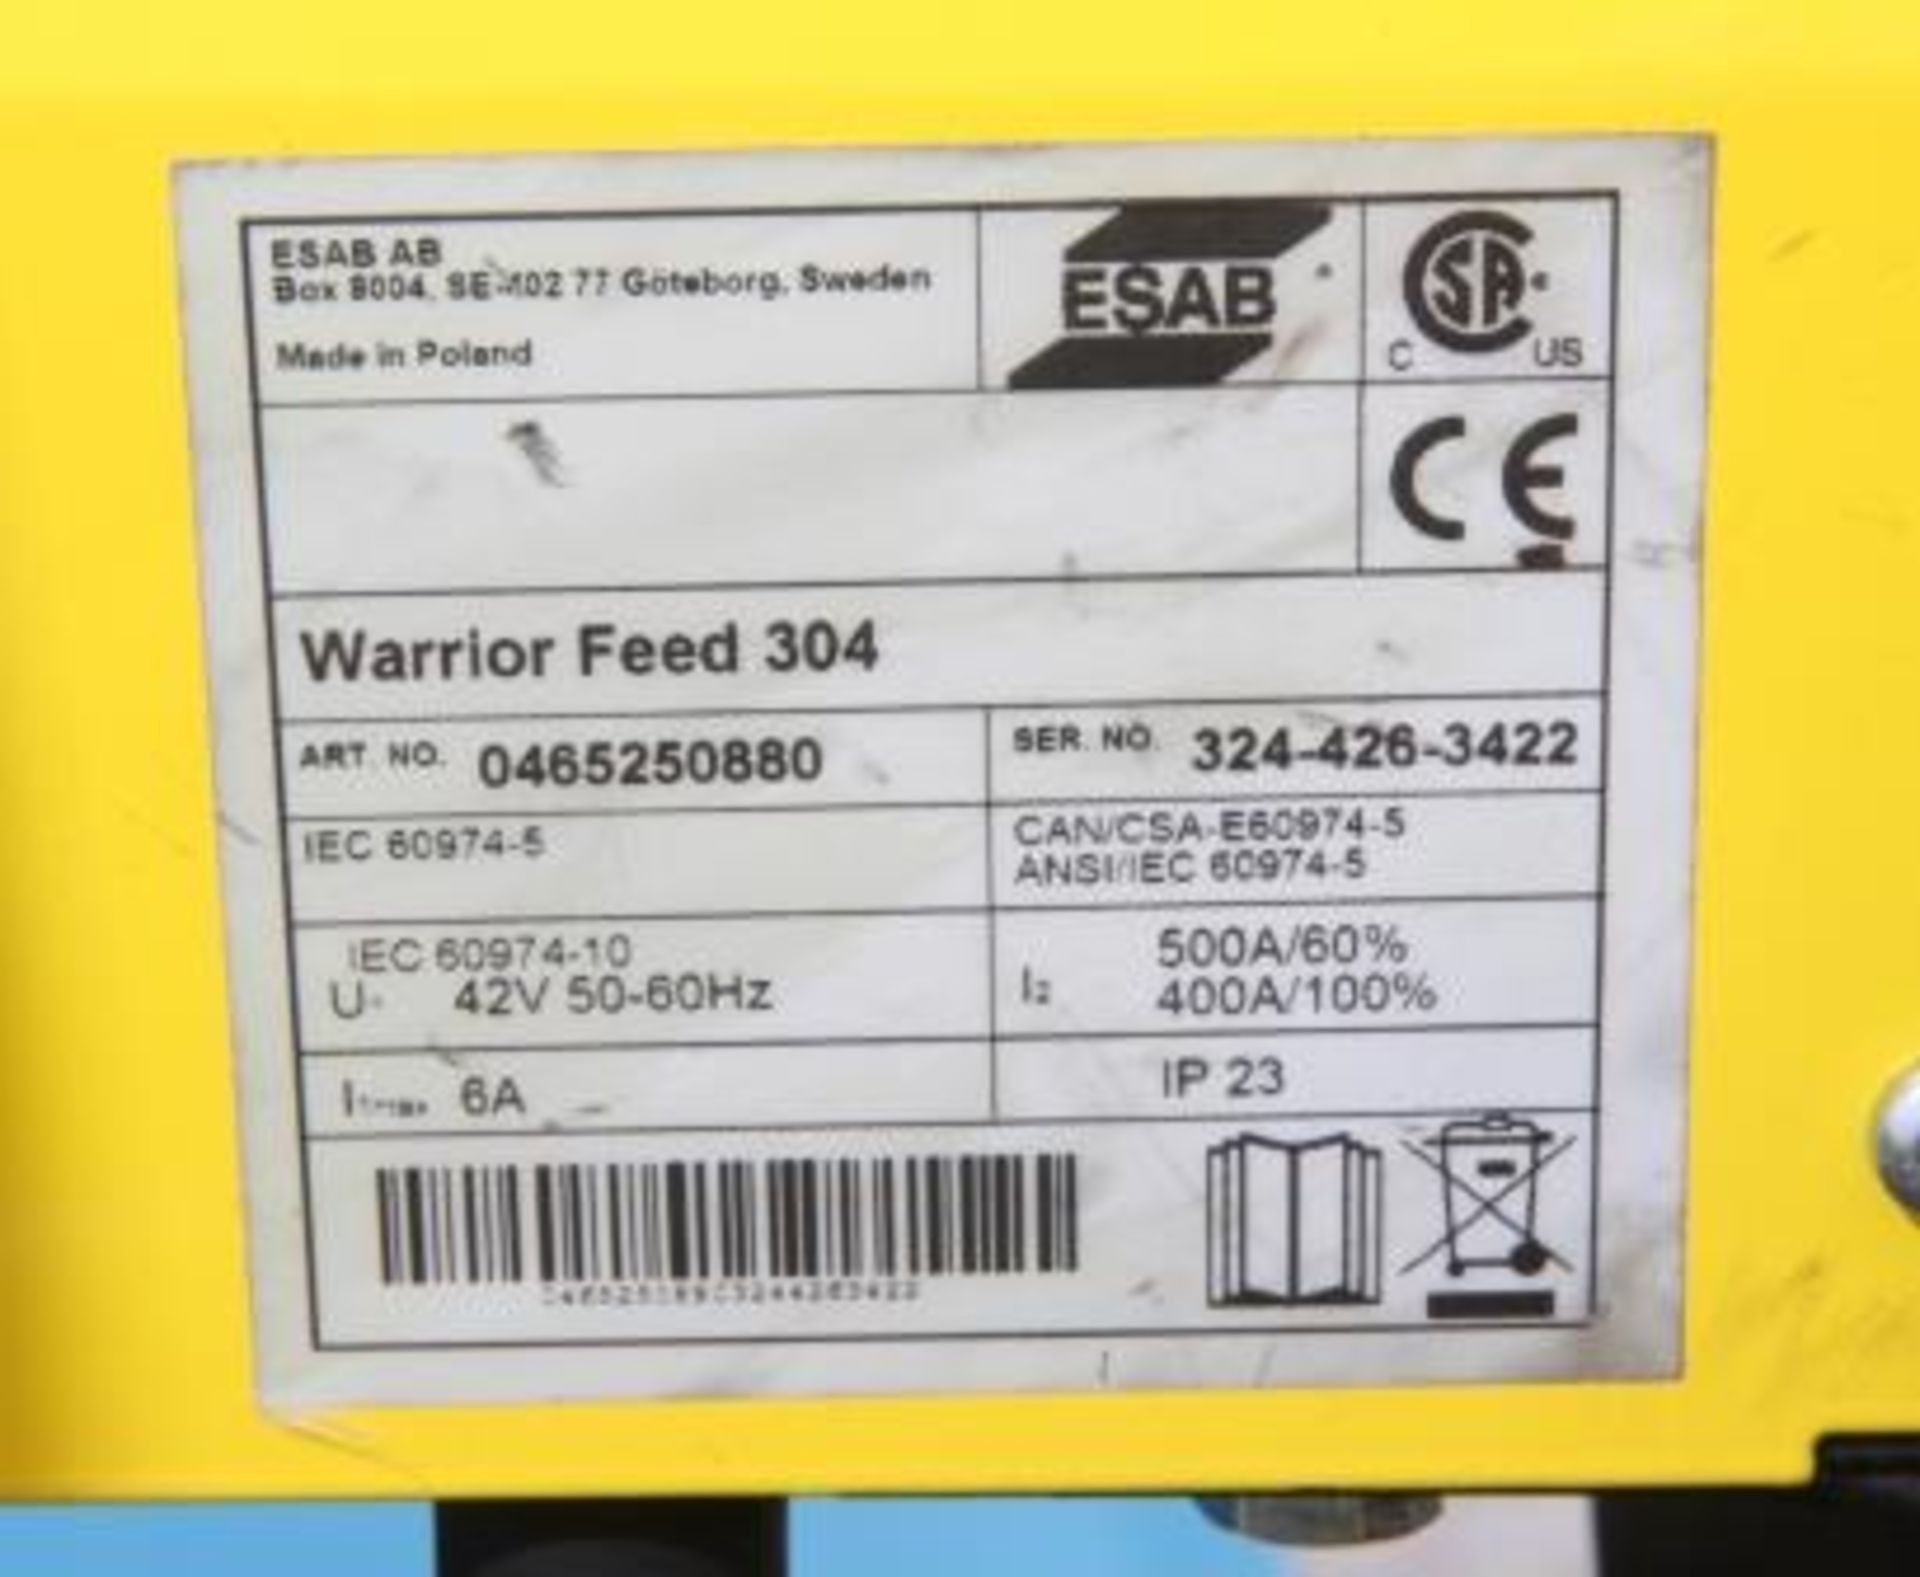 ESAB Warrior 400i CC/CV Weld Set Complete With Warrior Feed 304 - Image 5 of 5